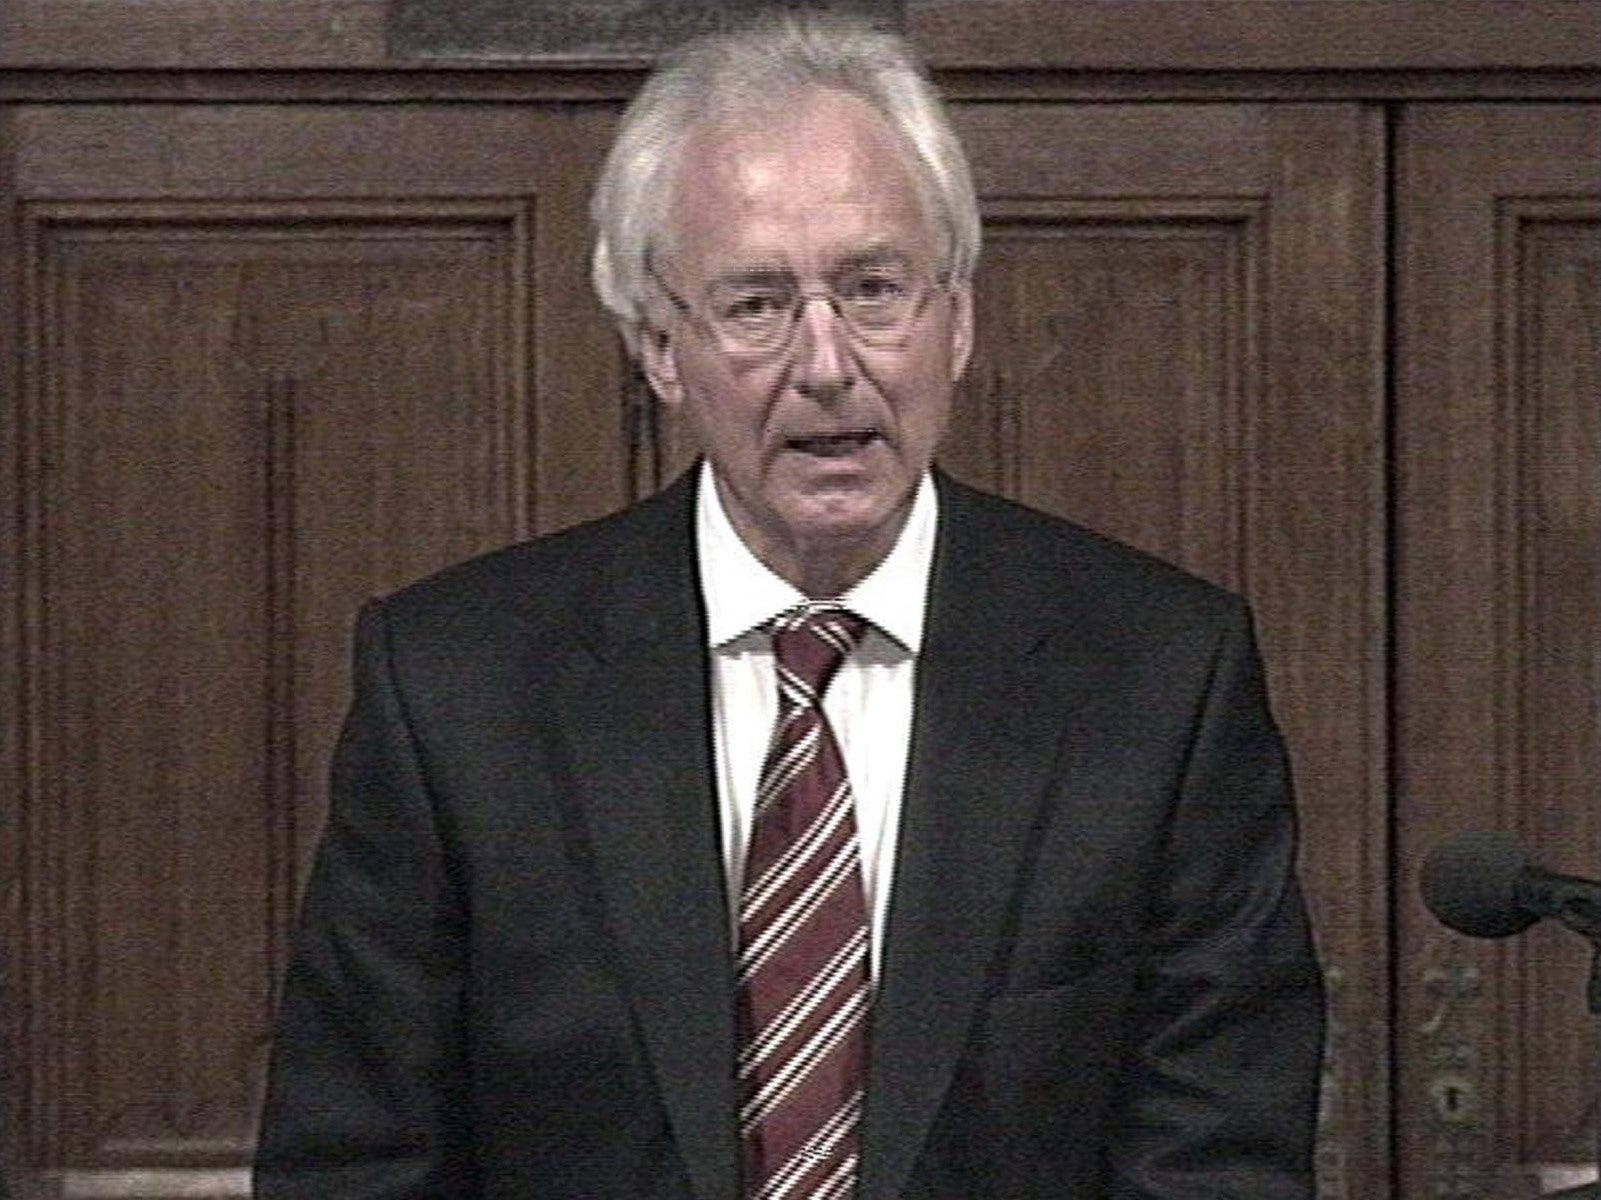 Lord Michael Spicer founded the ERG in 1993 before serving as the chairman of the backbench 1922 Committee